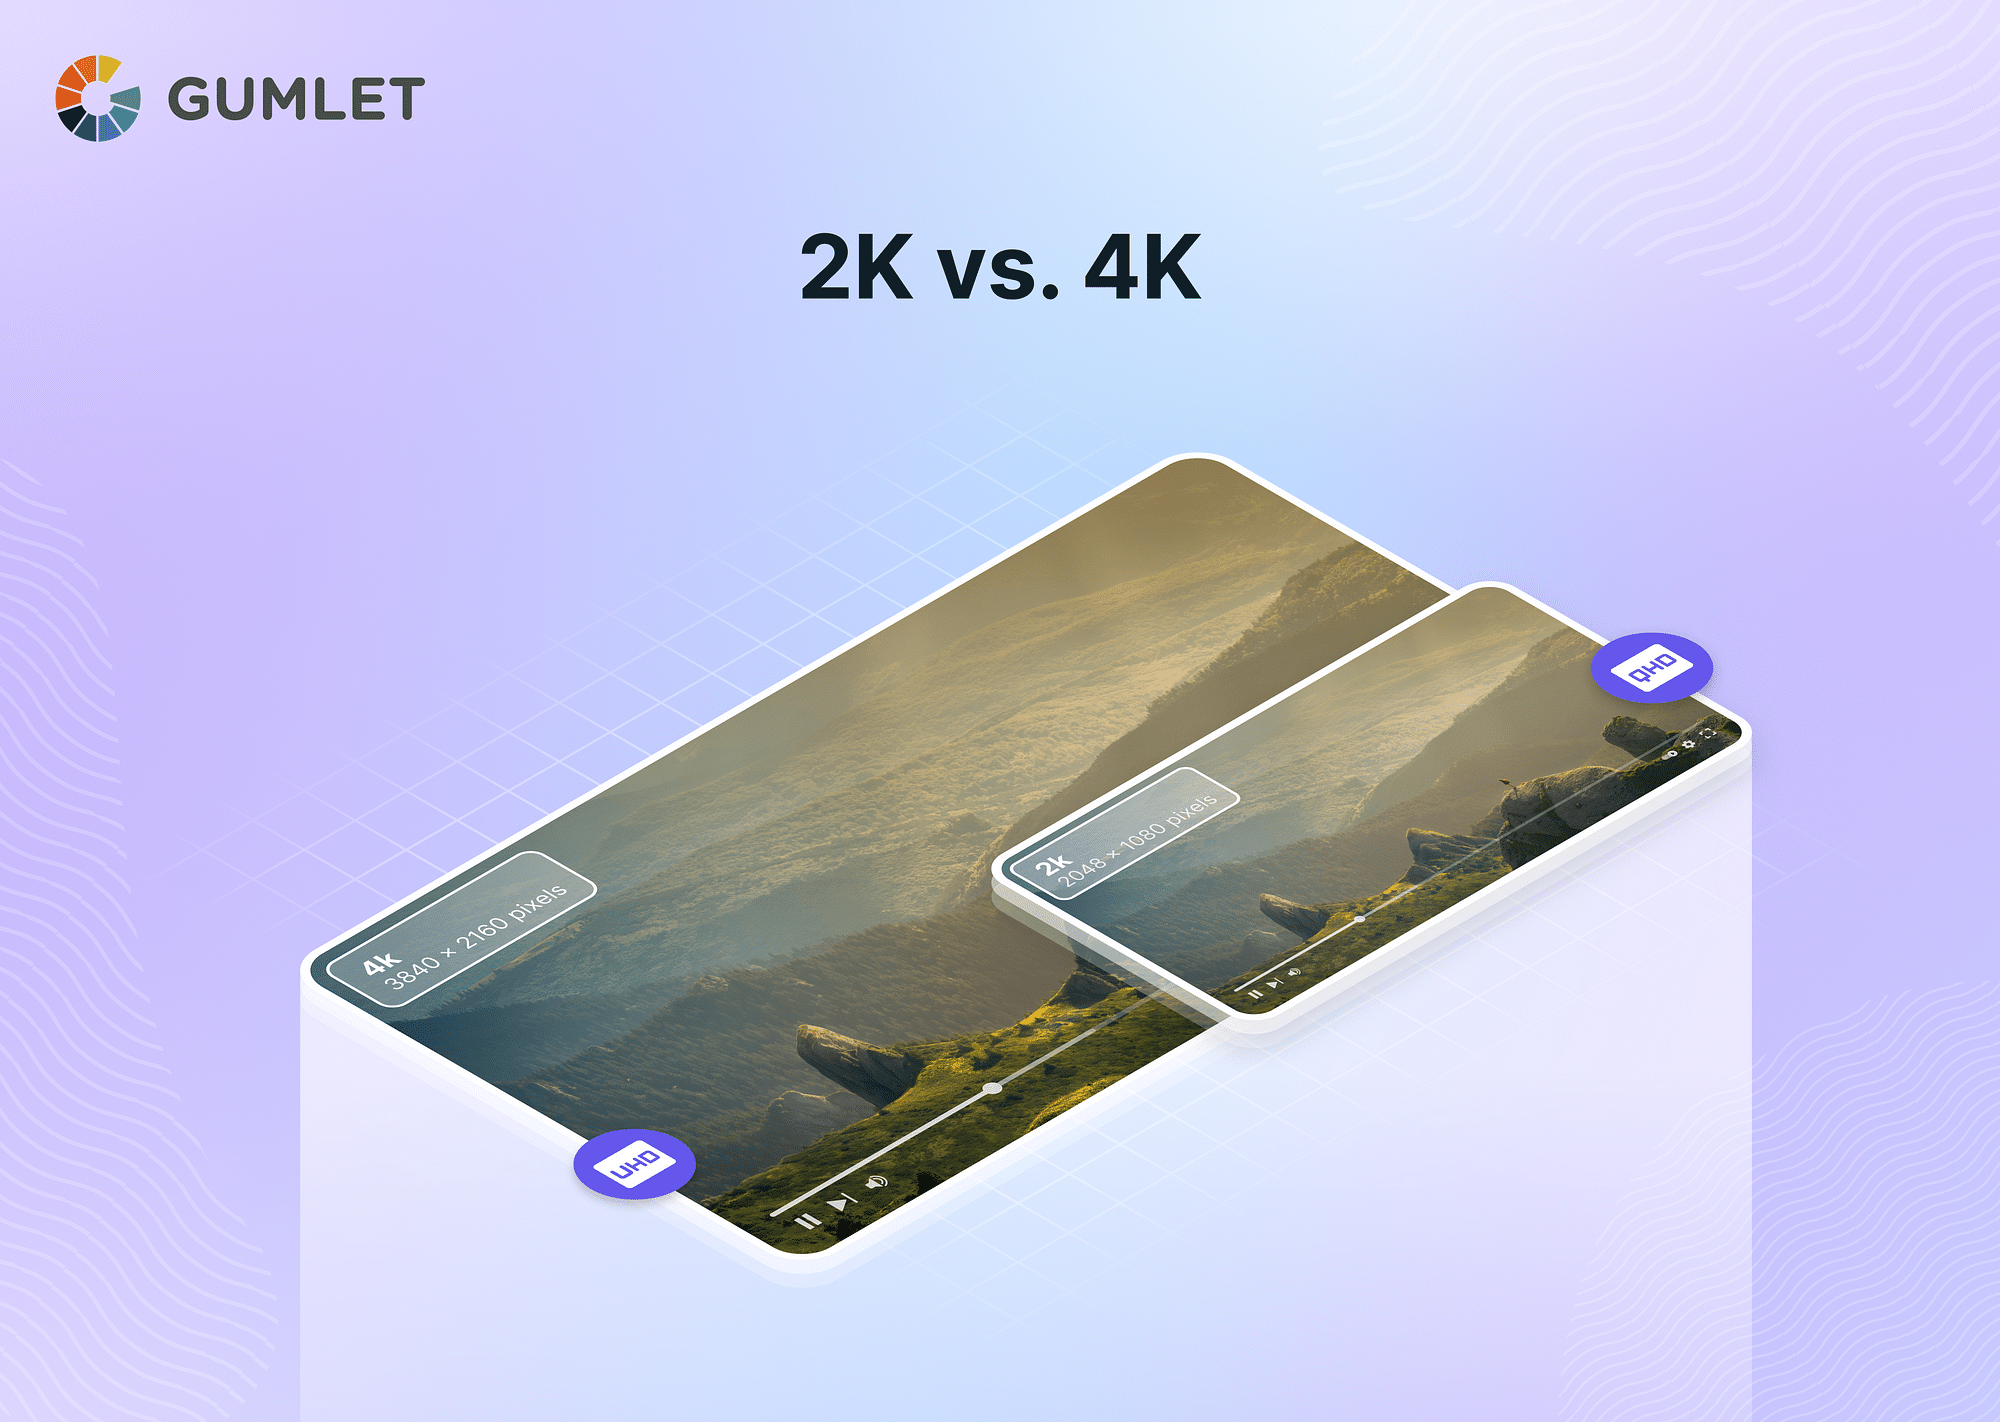 2K vs. 4K: Difference between 2K and 4K